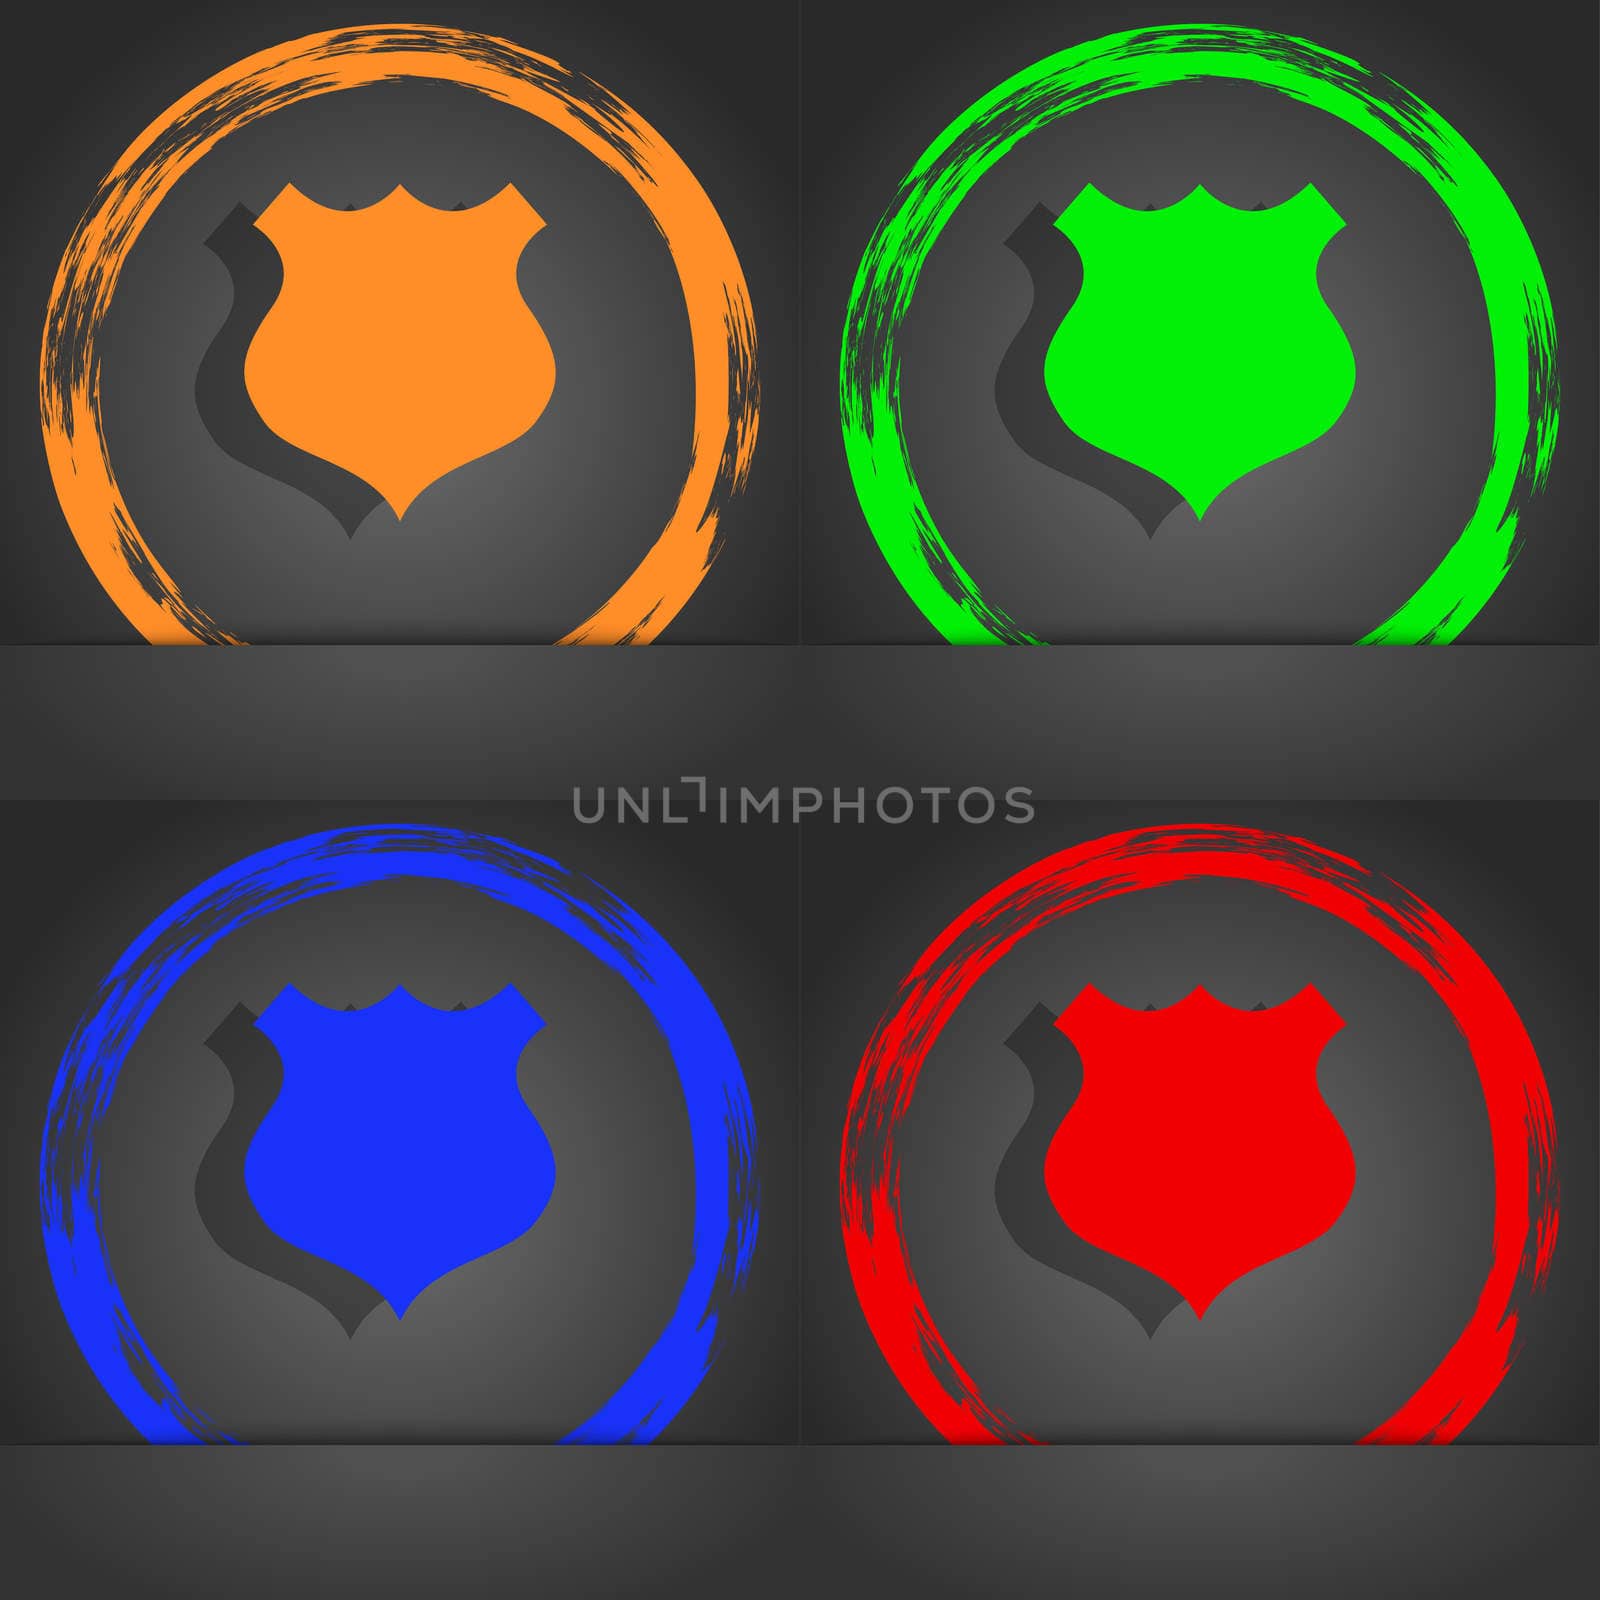 shield icon sign. Fashionable modern style. In the orange, green, blue, red design.  by serhii_lohvyniuk